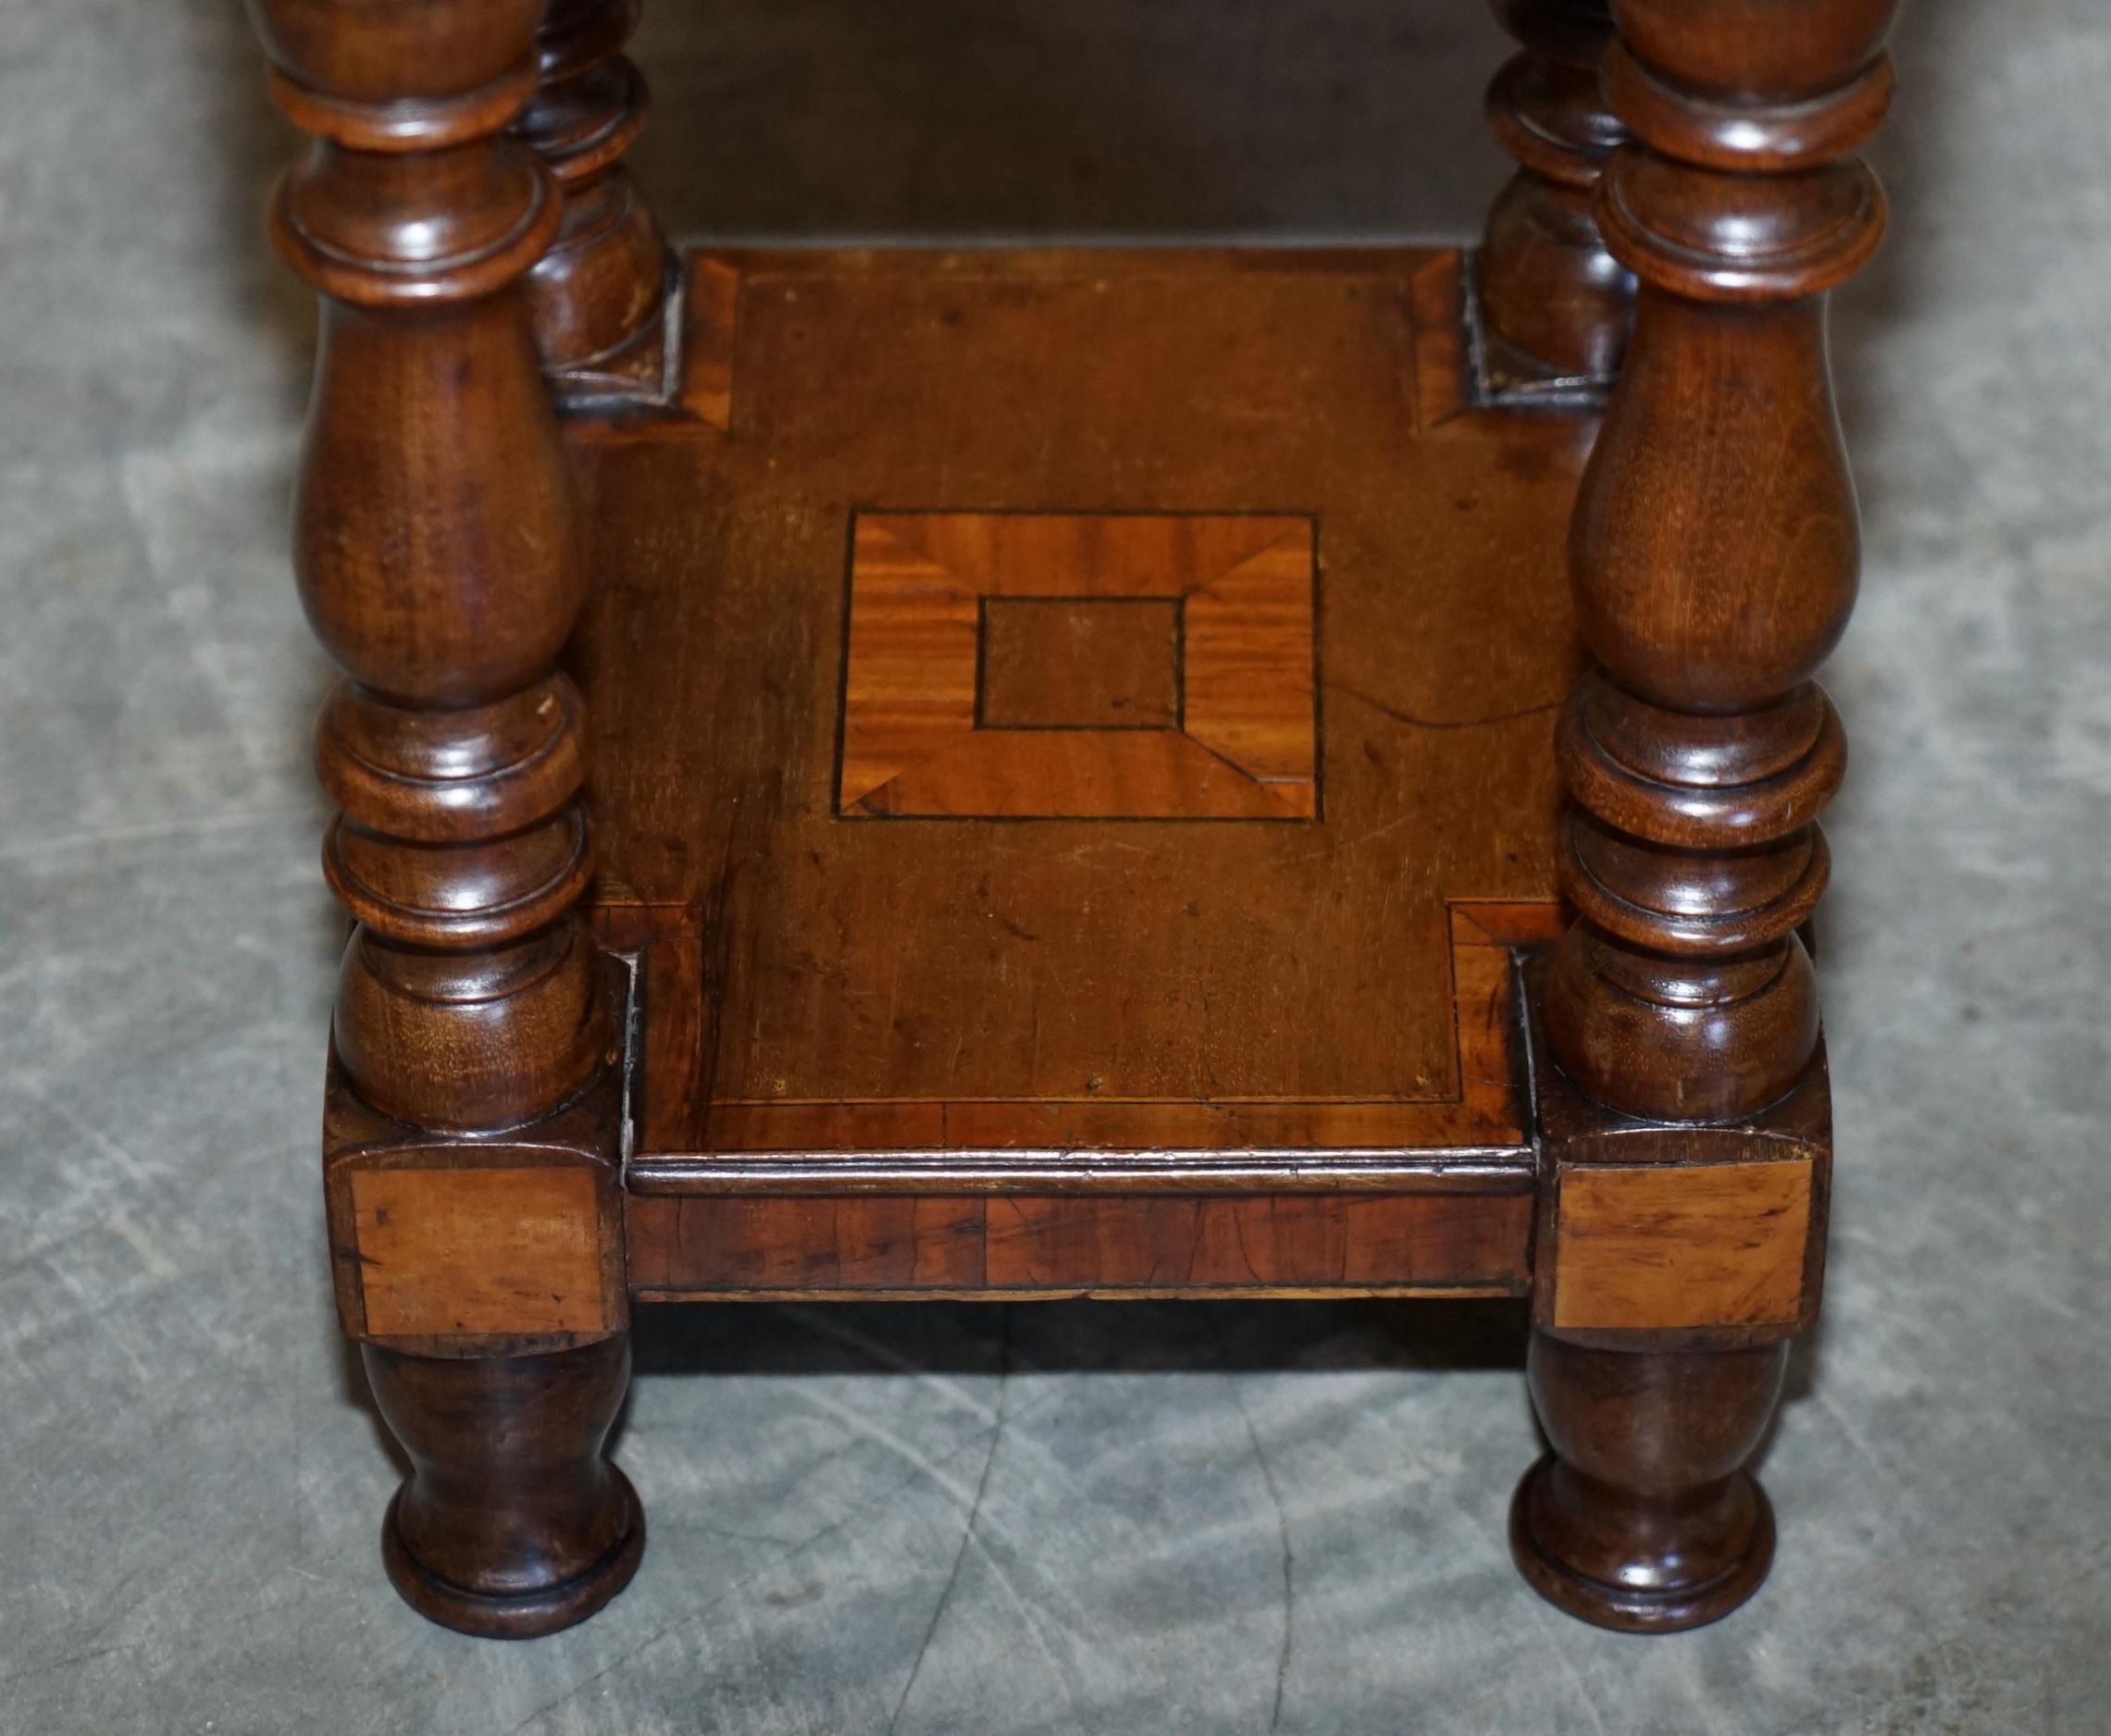 Hardwood Lovely Hand Made Antique Victorian Side Table Sheraton Reival Inlaid Top Drawers For Sale